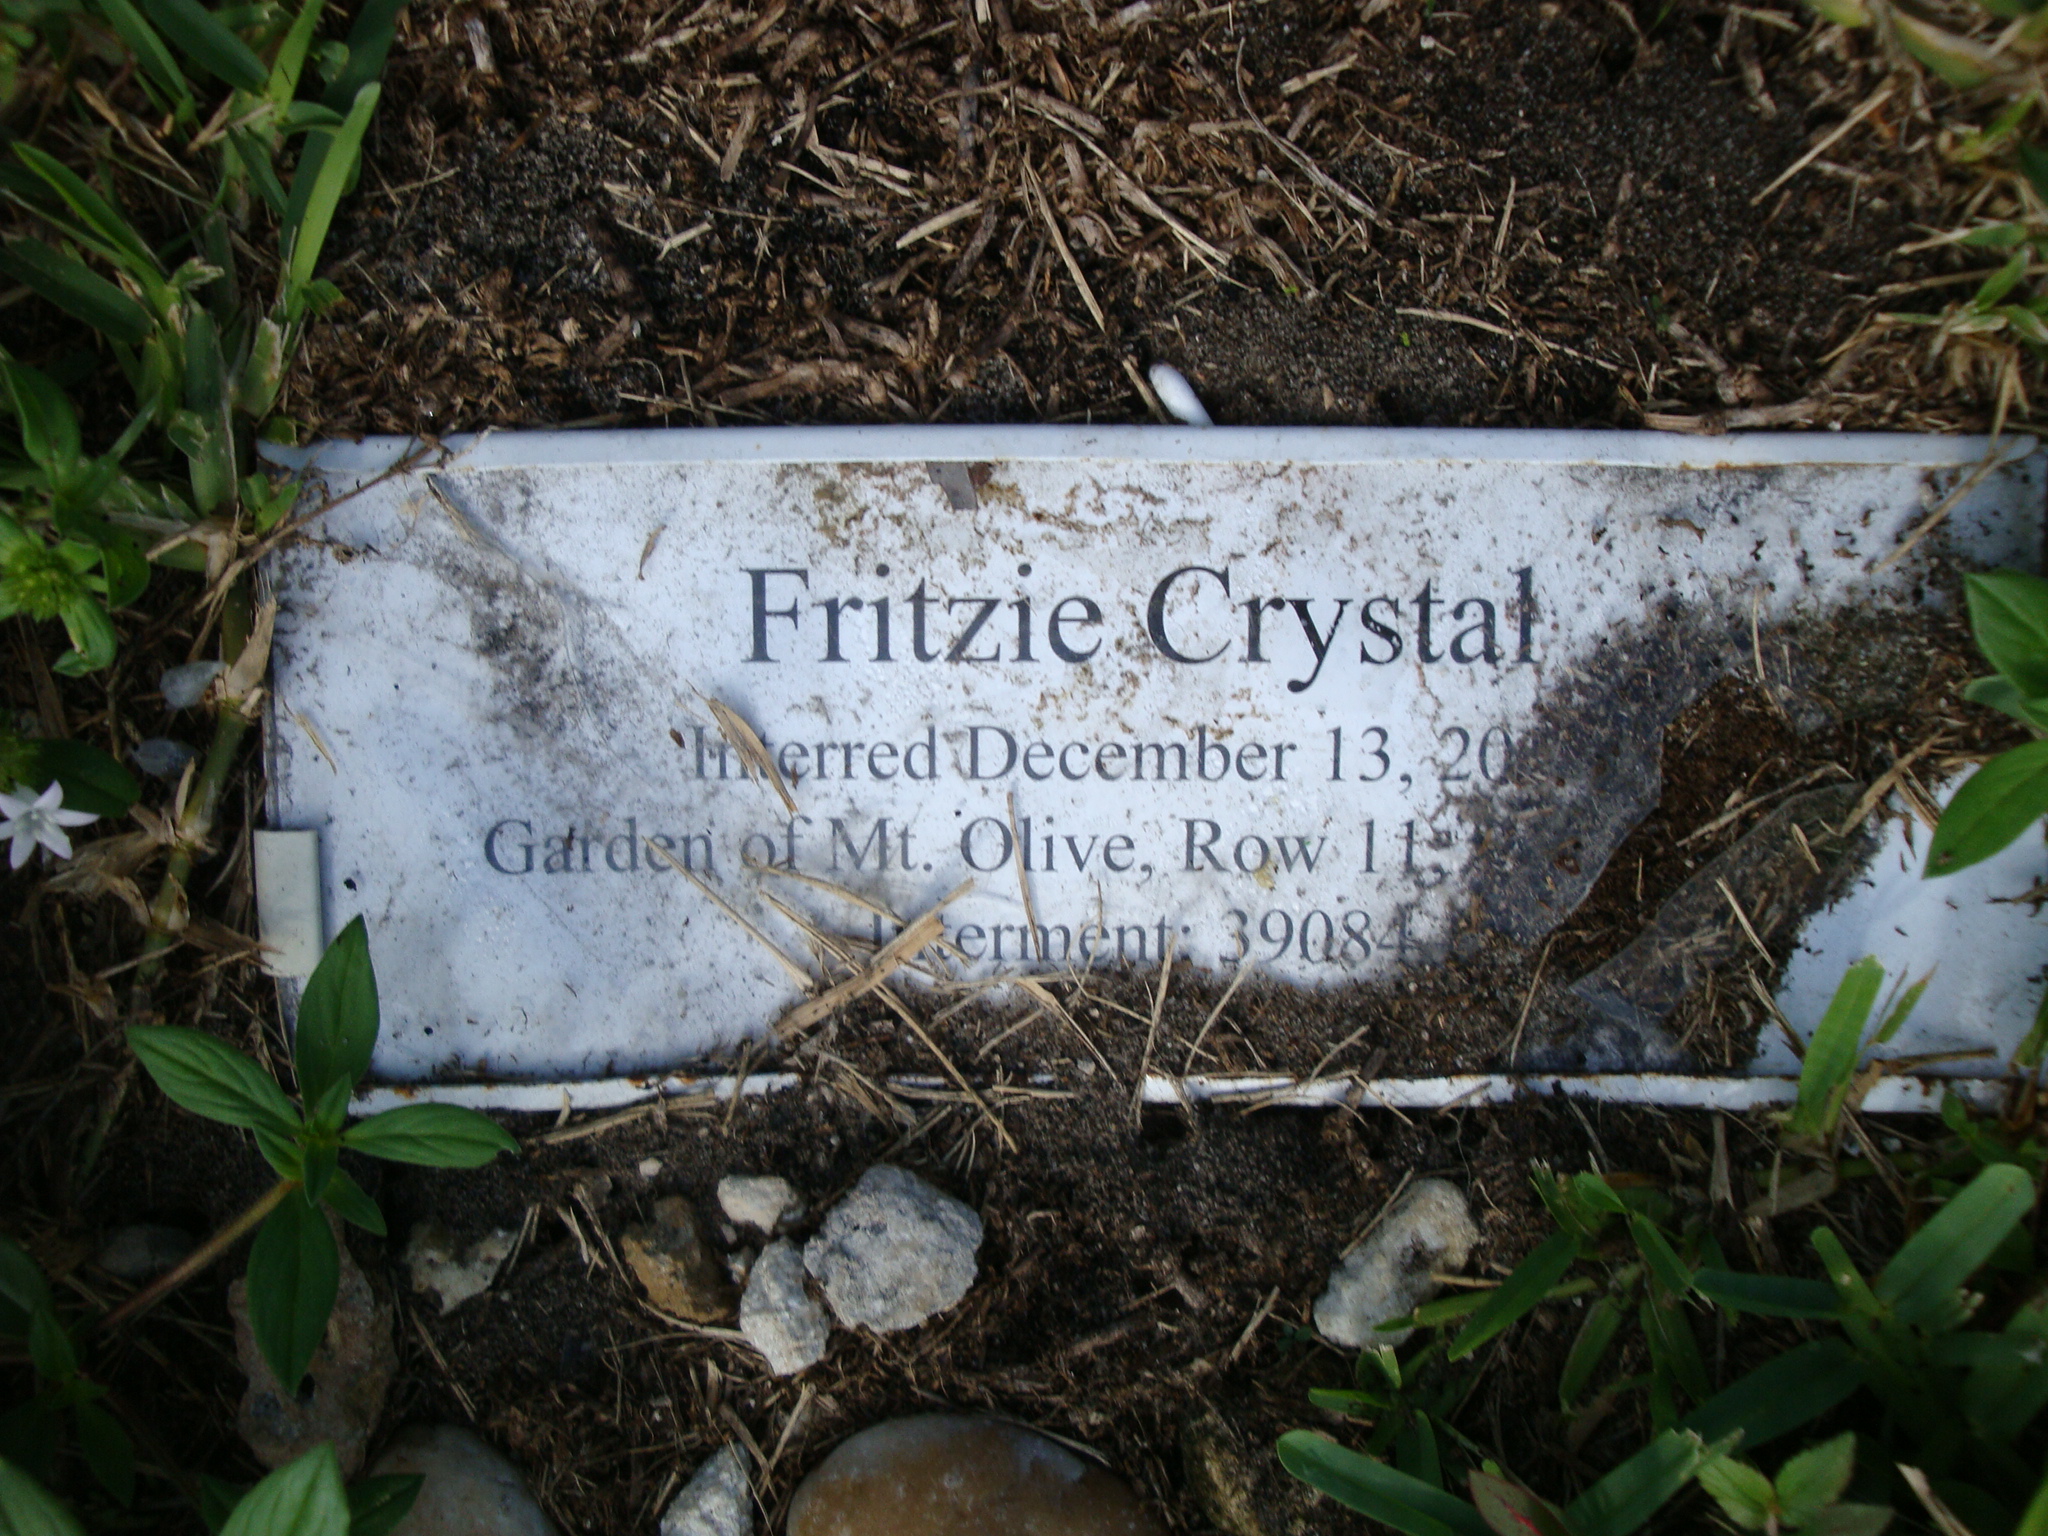 Fritzie Crystal